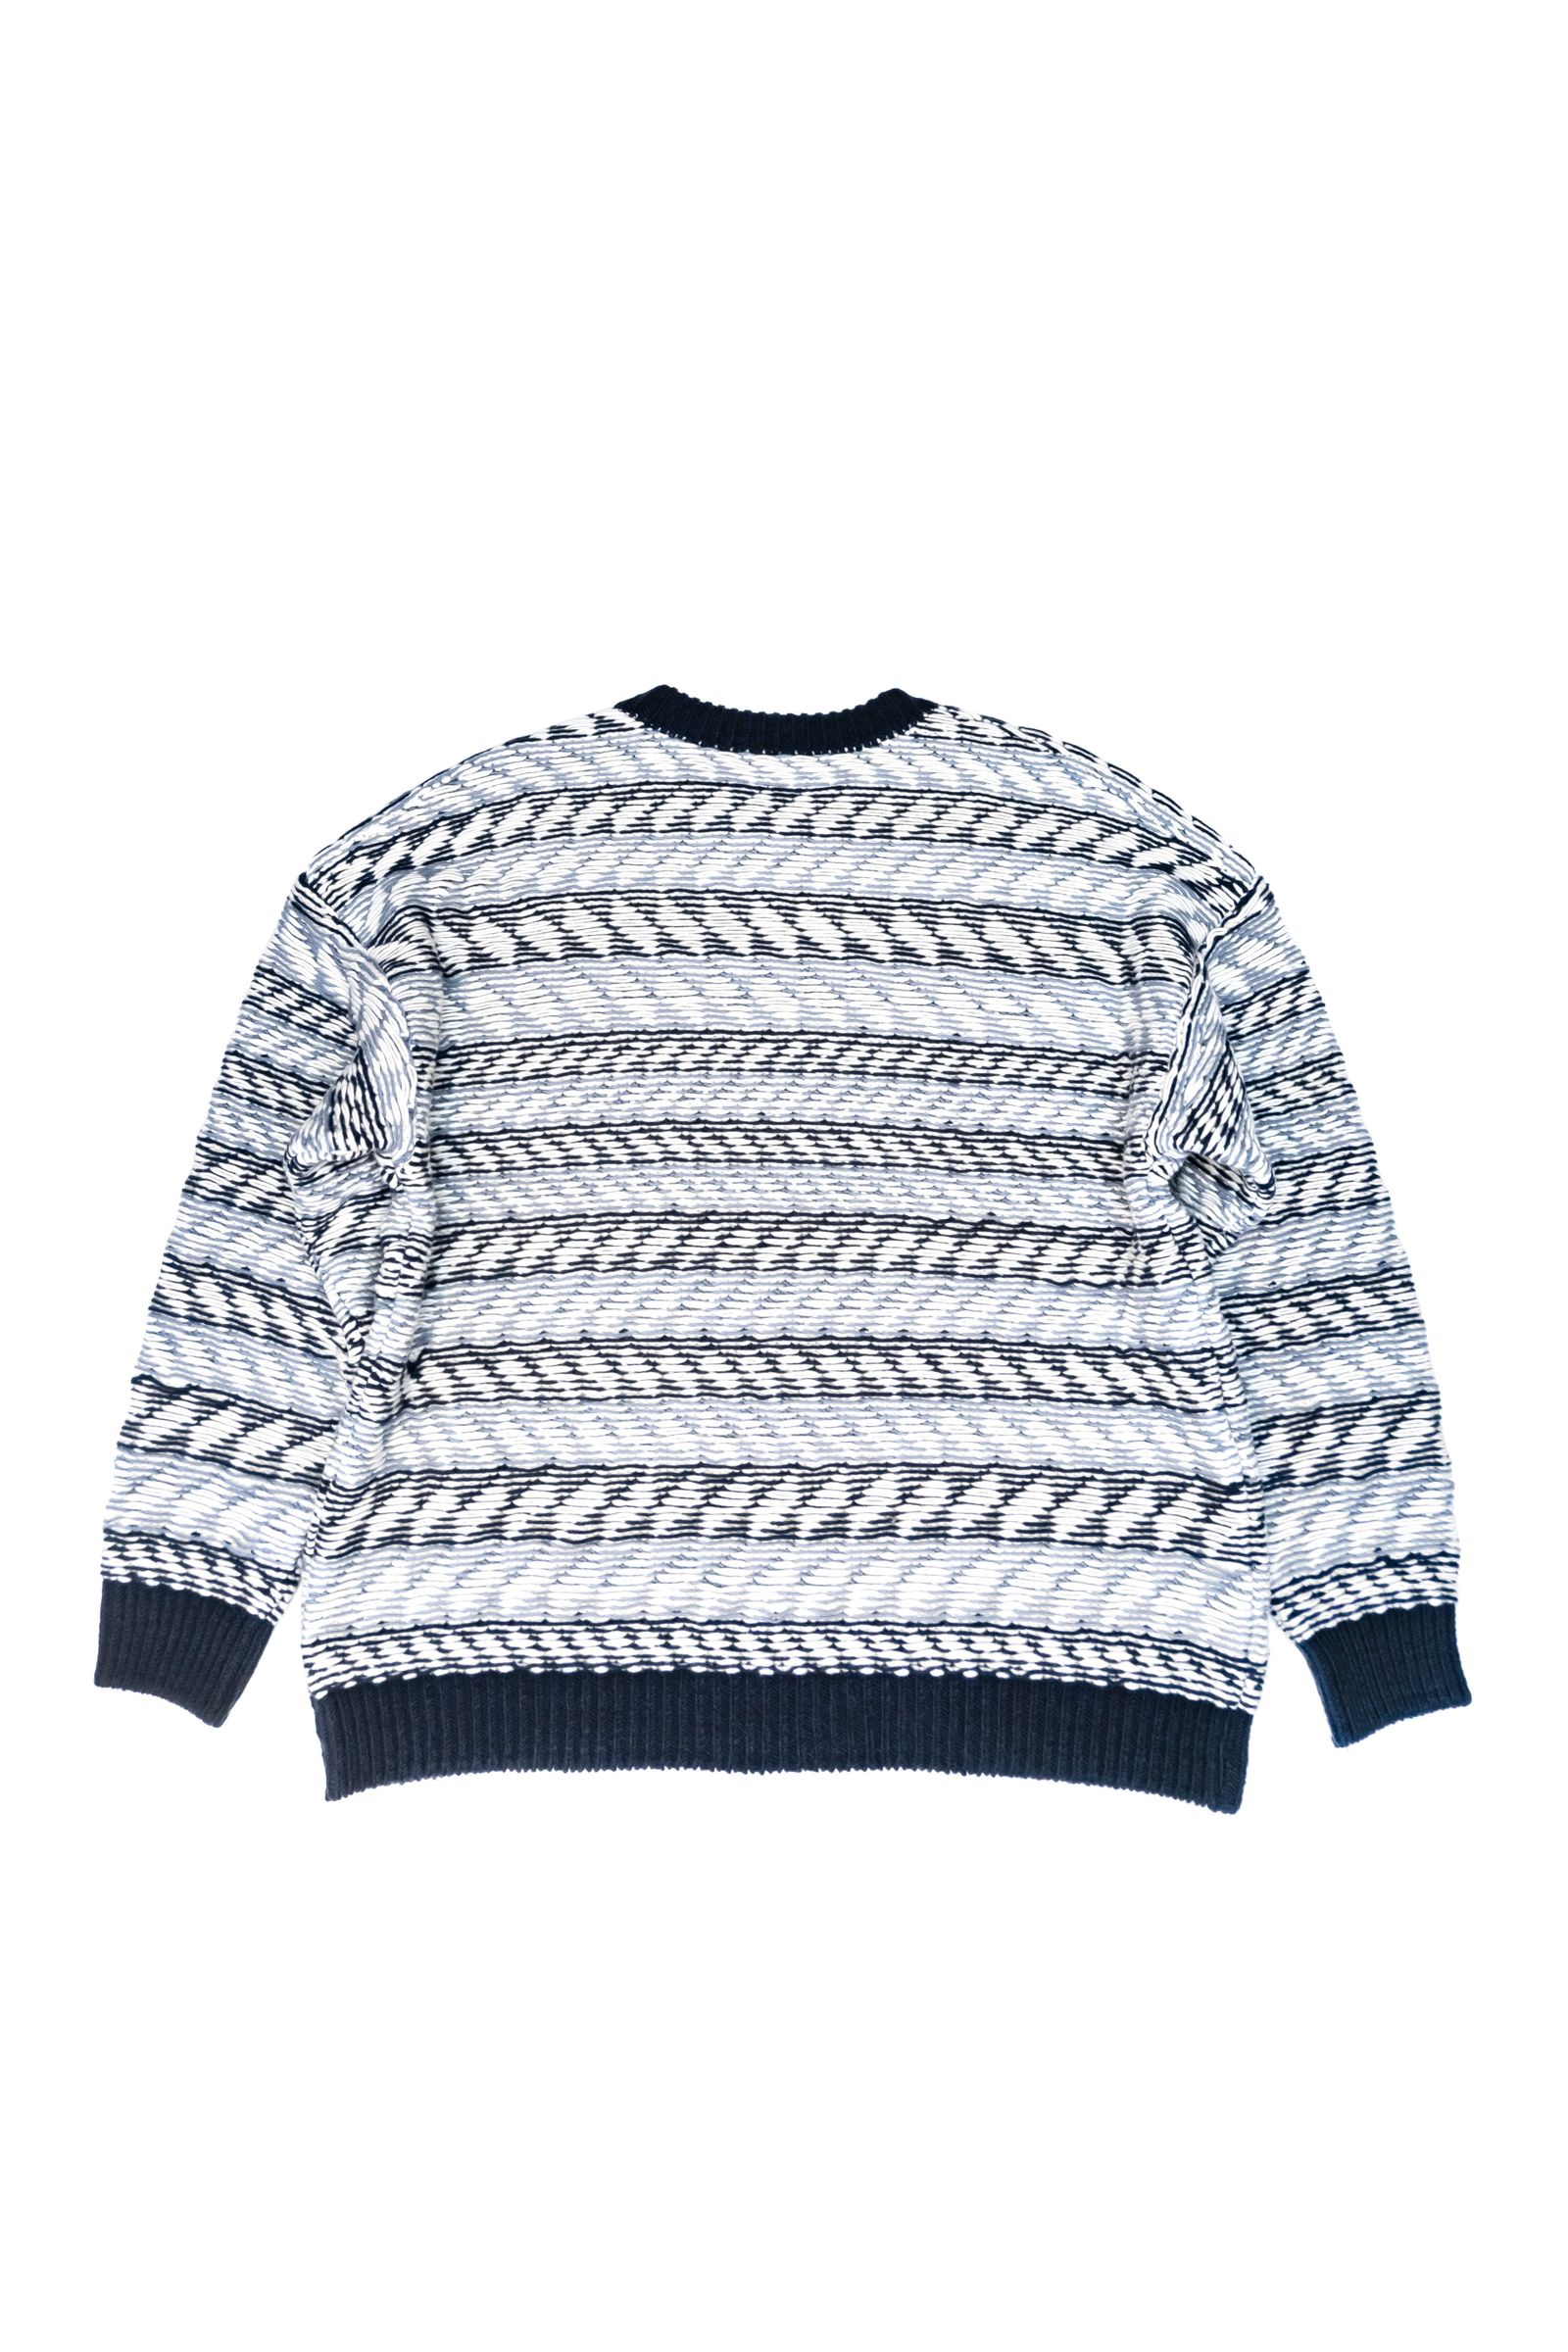 Blanc YM - Inside out Knit / Navy | Retikle Online Store